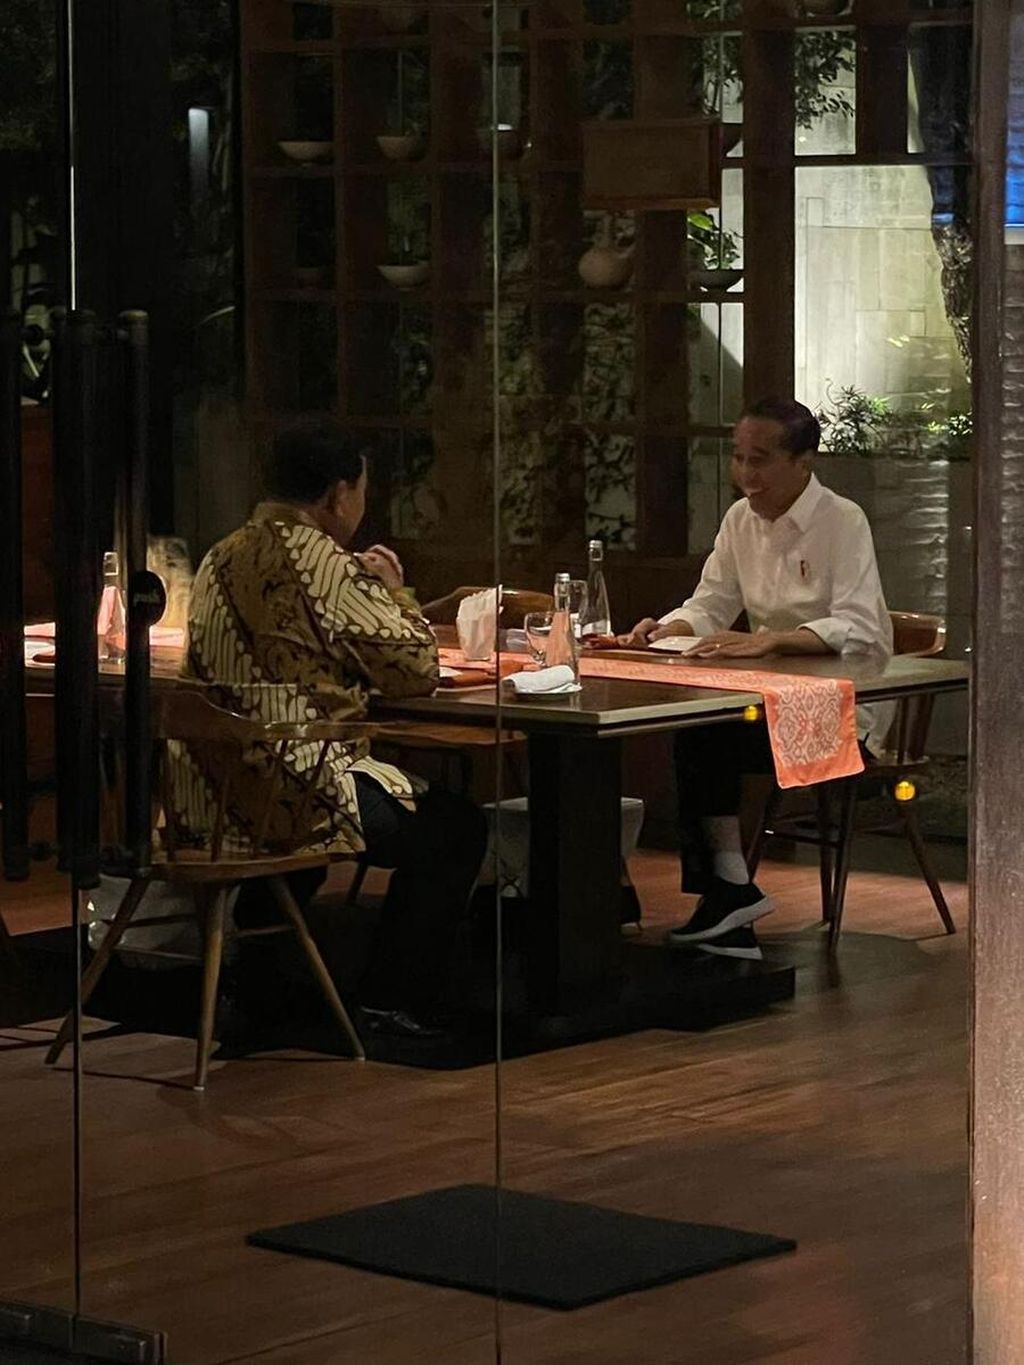 In the midst of the heated political climate leading up to the 2024 presidential election, President Joko Widodo dined with Defense Minister and presidential candidate Prabowo Subianto in Jakarta on Friday, January 5th, 2023.